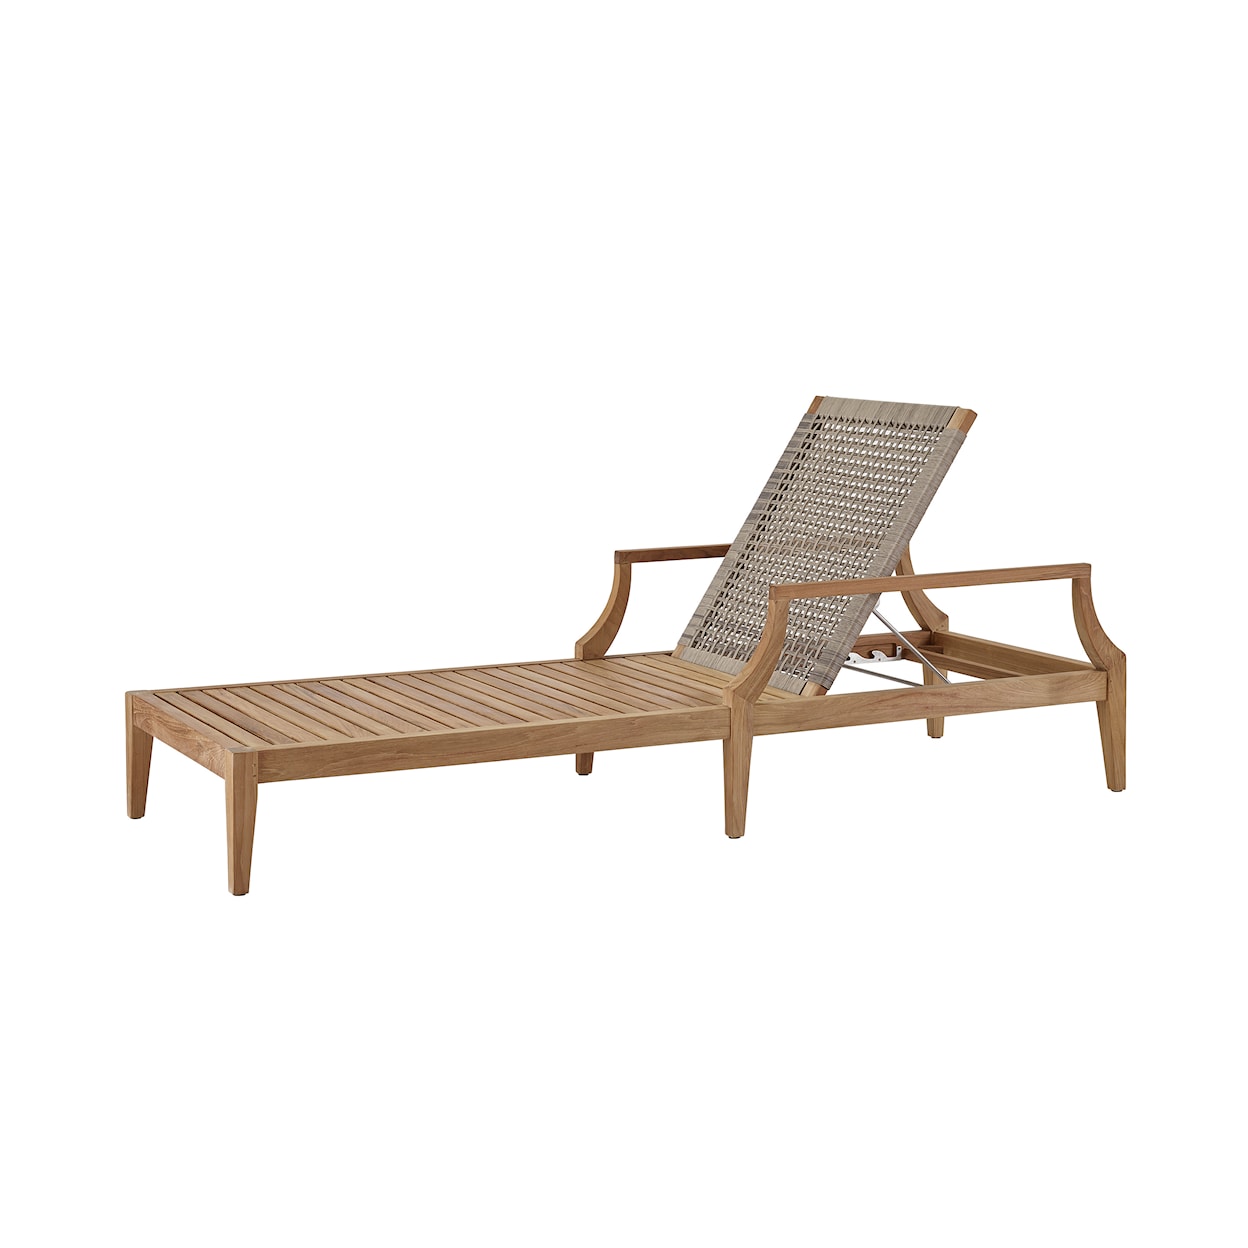 Universal Coastal Living Outdoor Outdoor Chesapeake Chaise Lounge